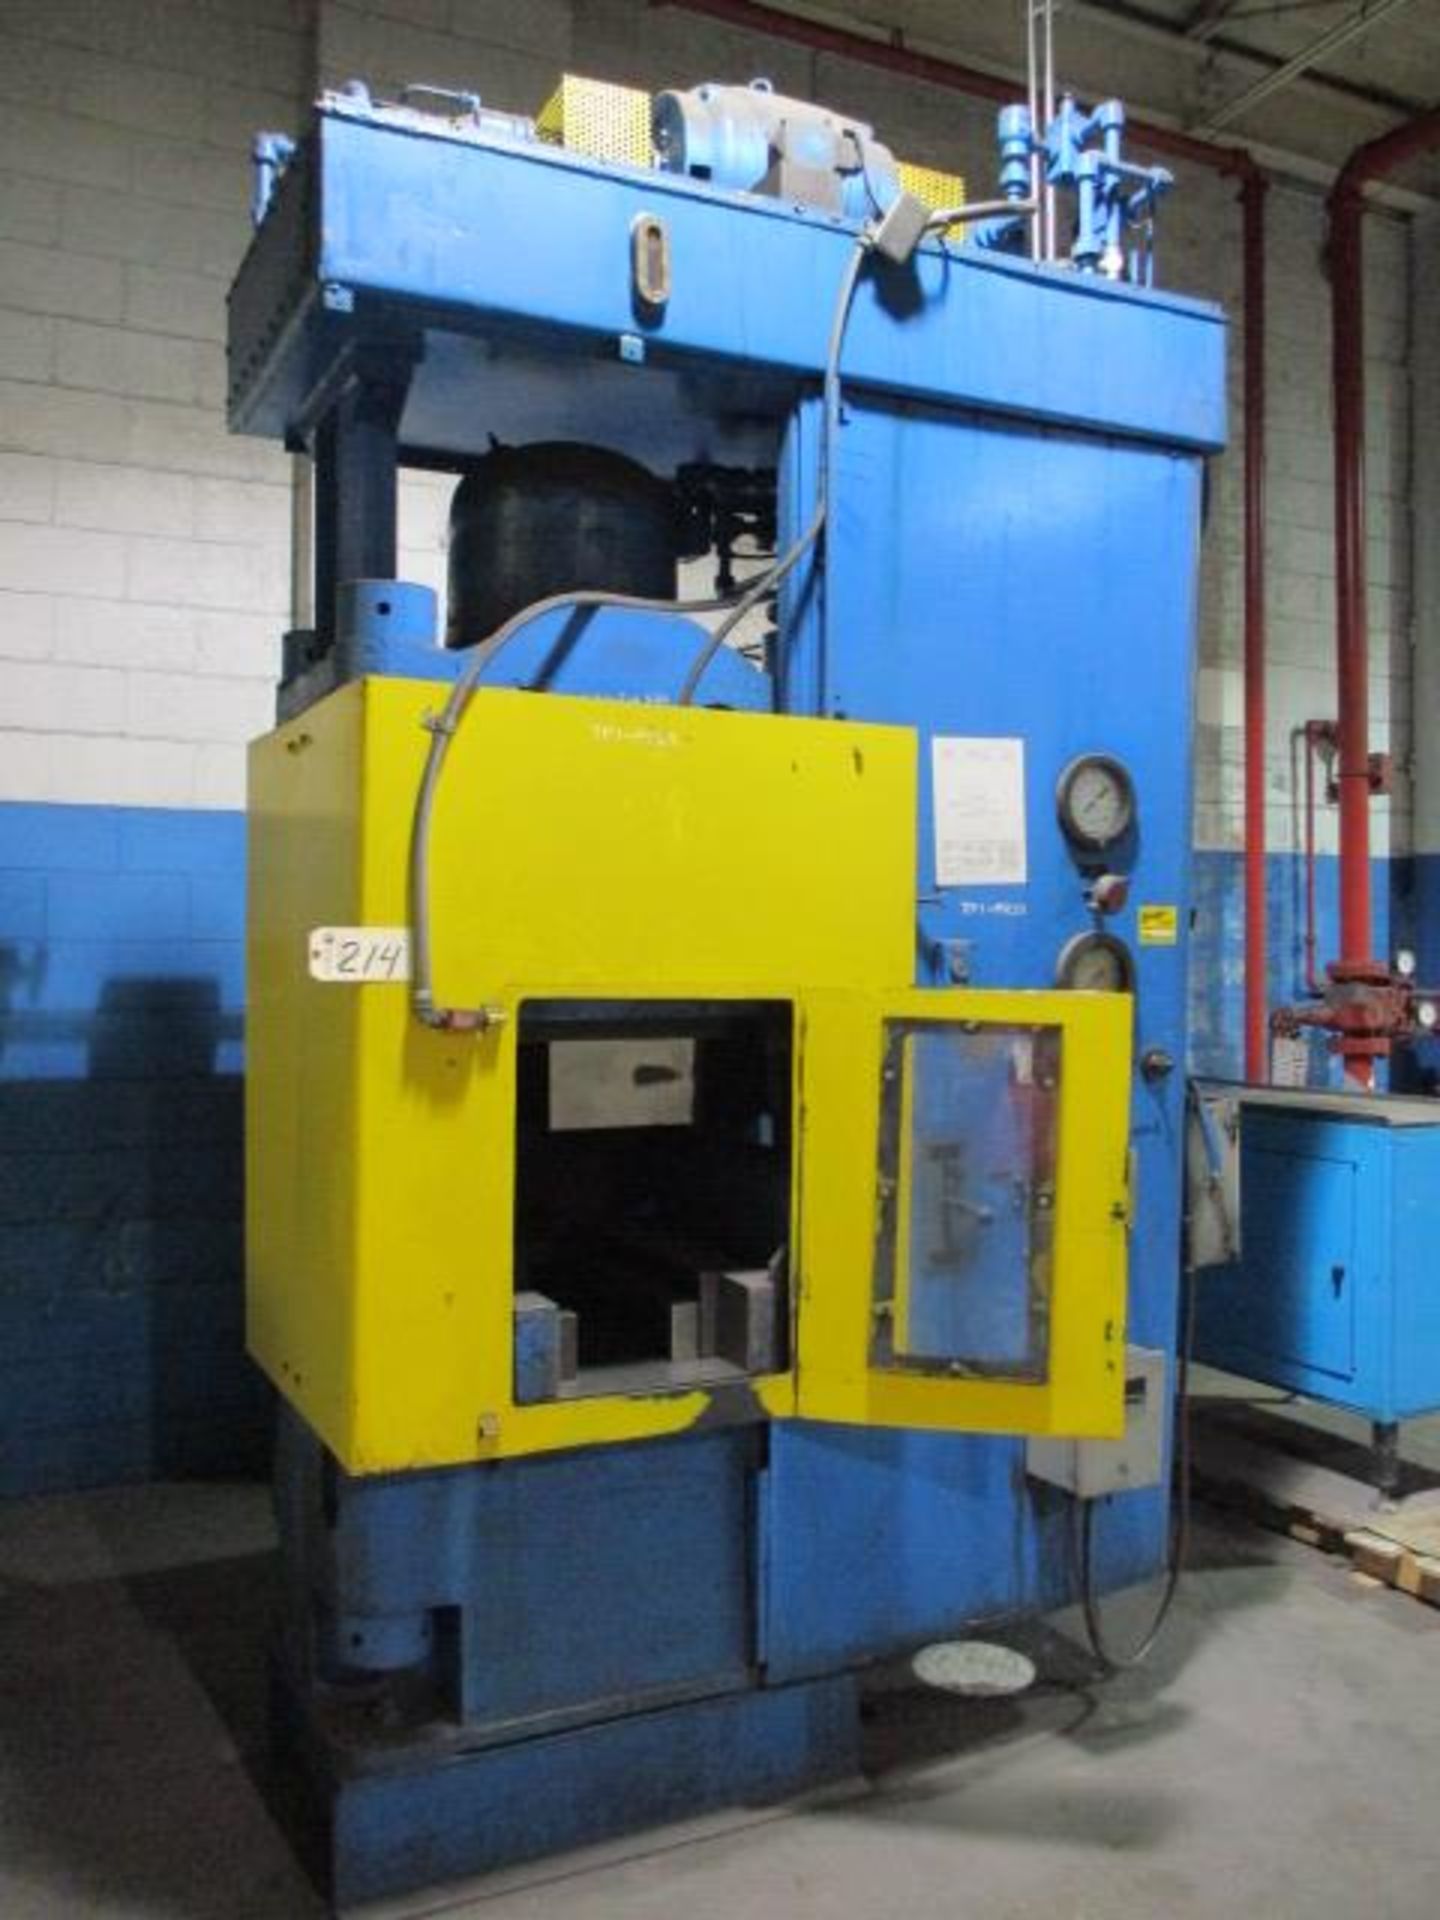 Mohr/Modern Hydraulic Corp 200 Ton IR Side Compaction Press - Image 3 of 7